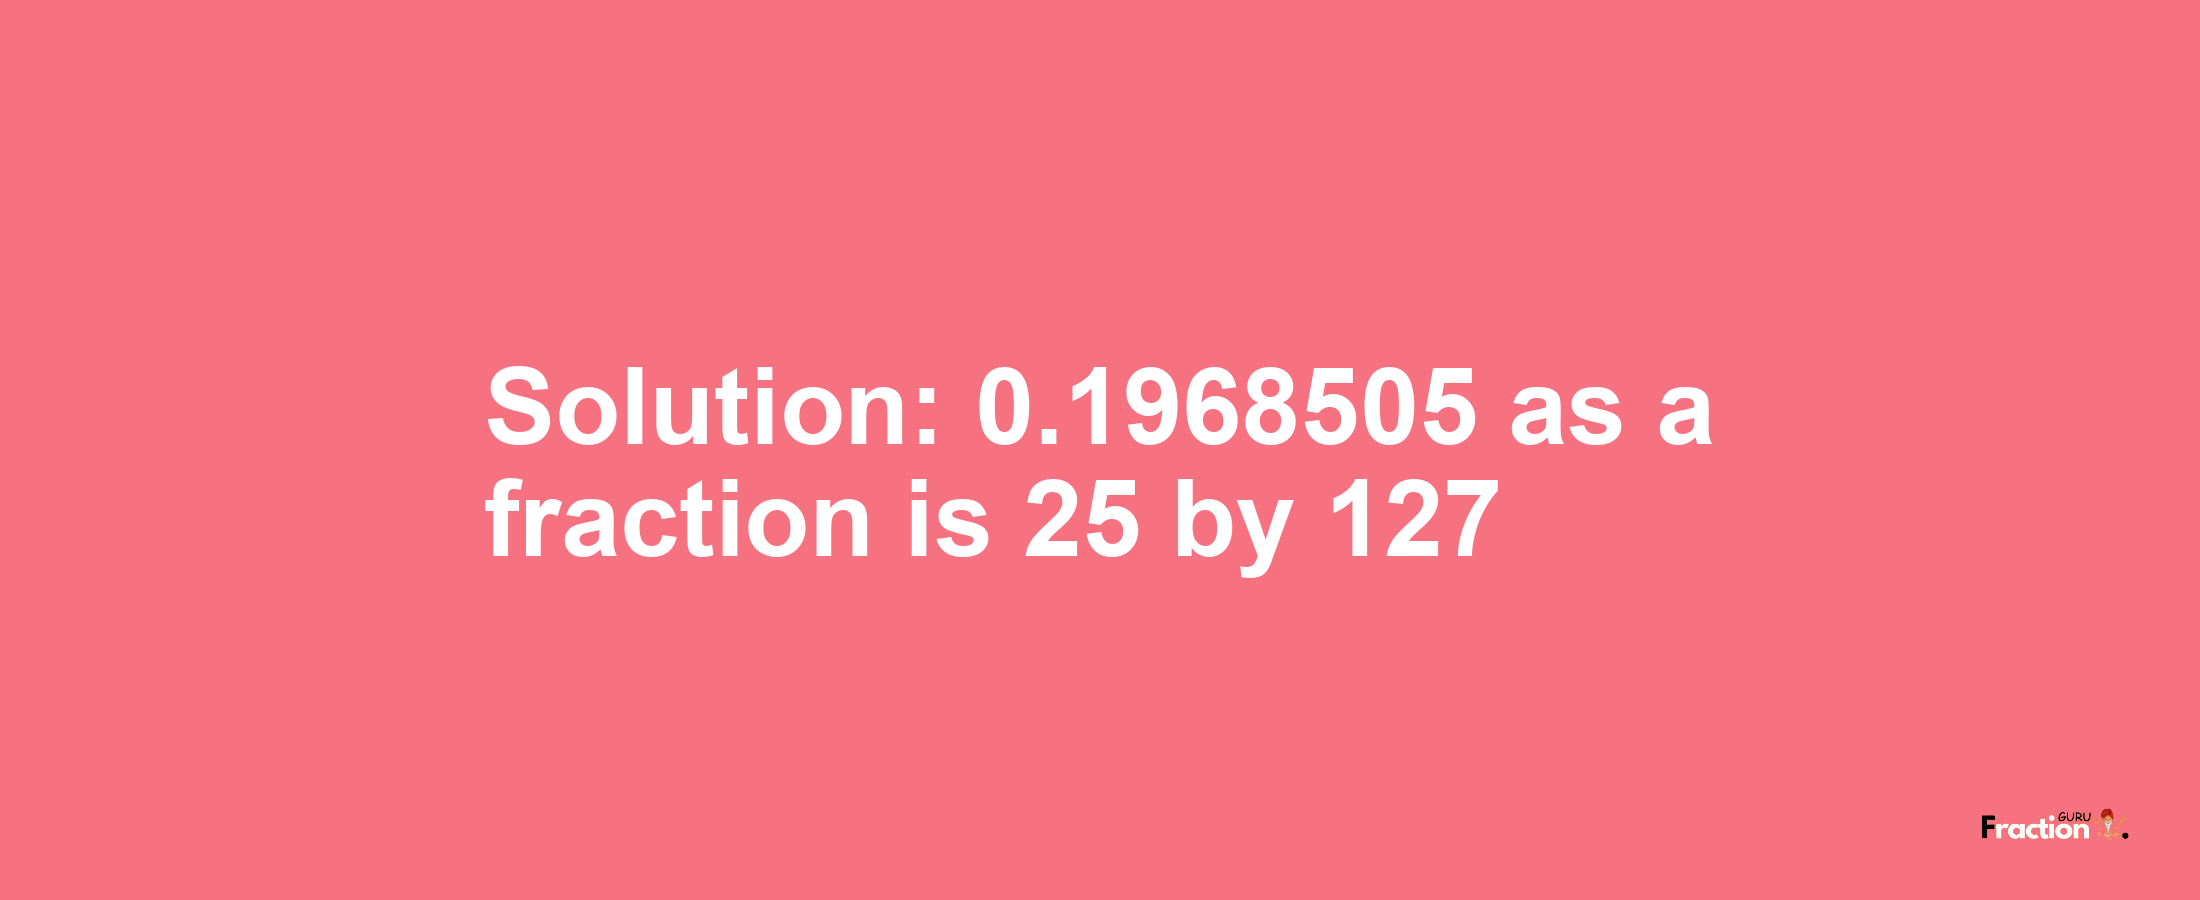 Solution:0.1968505 as a fraction is 25/127